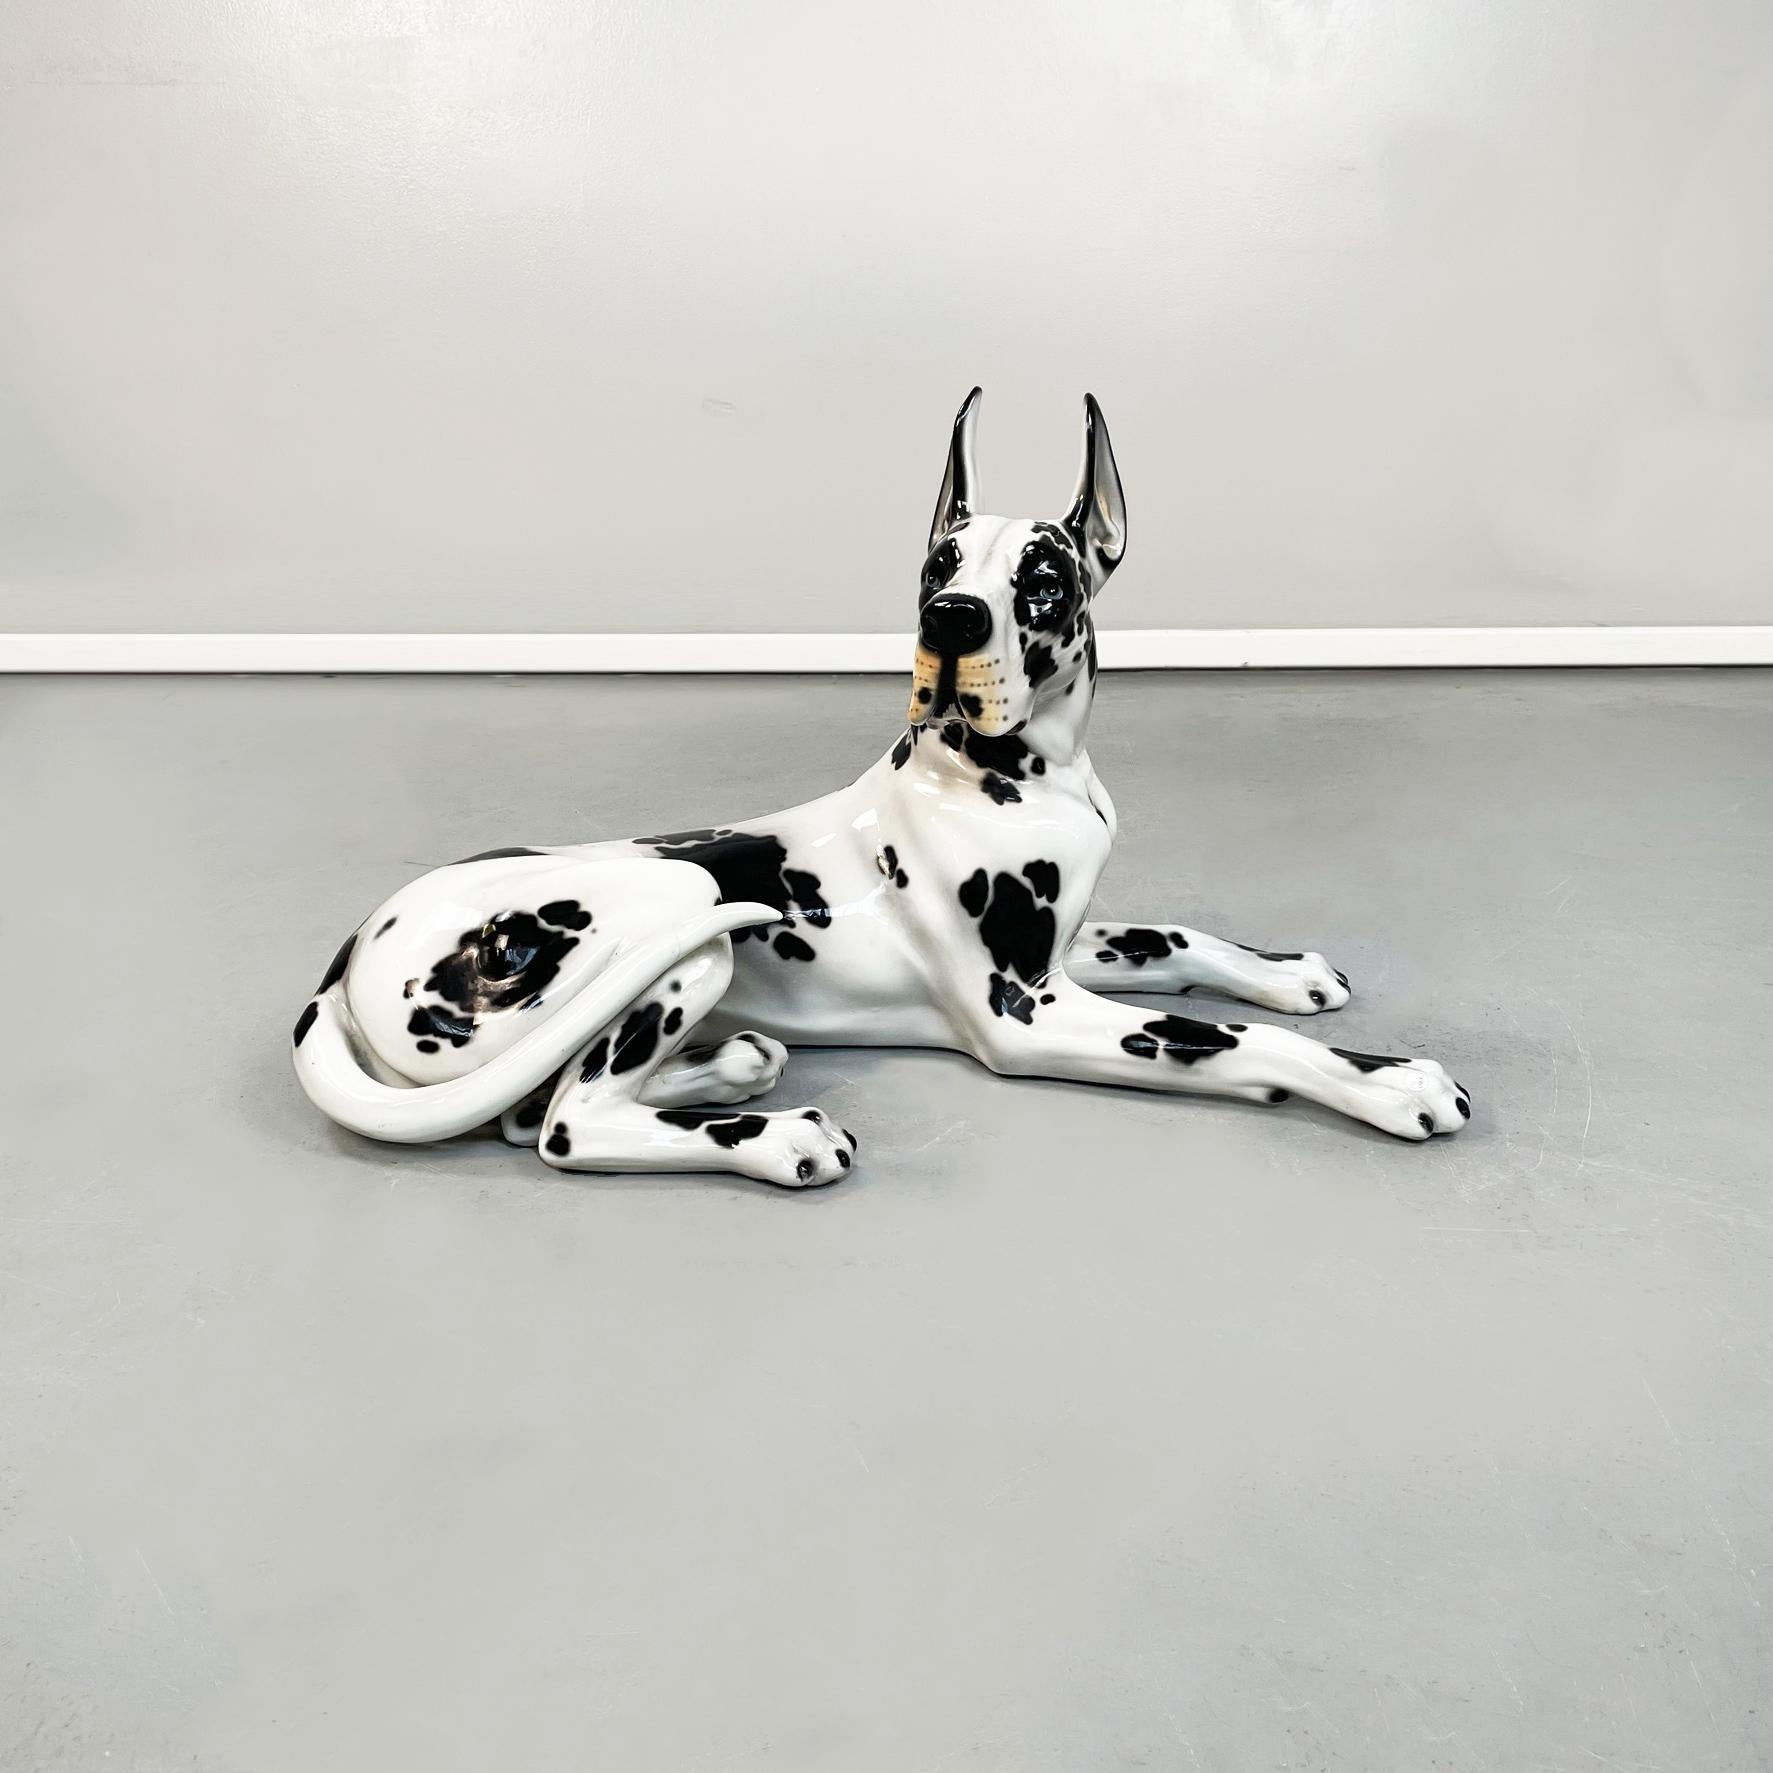 Italian late 20th century Black and white ceramic alano dog sculpture, 1970s
Alano dog lying down sculpture in white ceramic with black spots. Finely worked.
1970s.
Good conditions, with cracks and re-glued parts.
Measurements in cm 85 x 43 x 51 H.